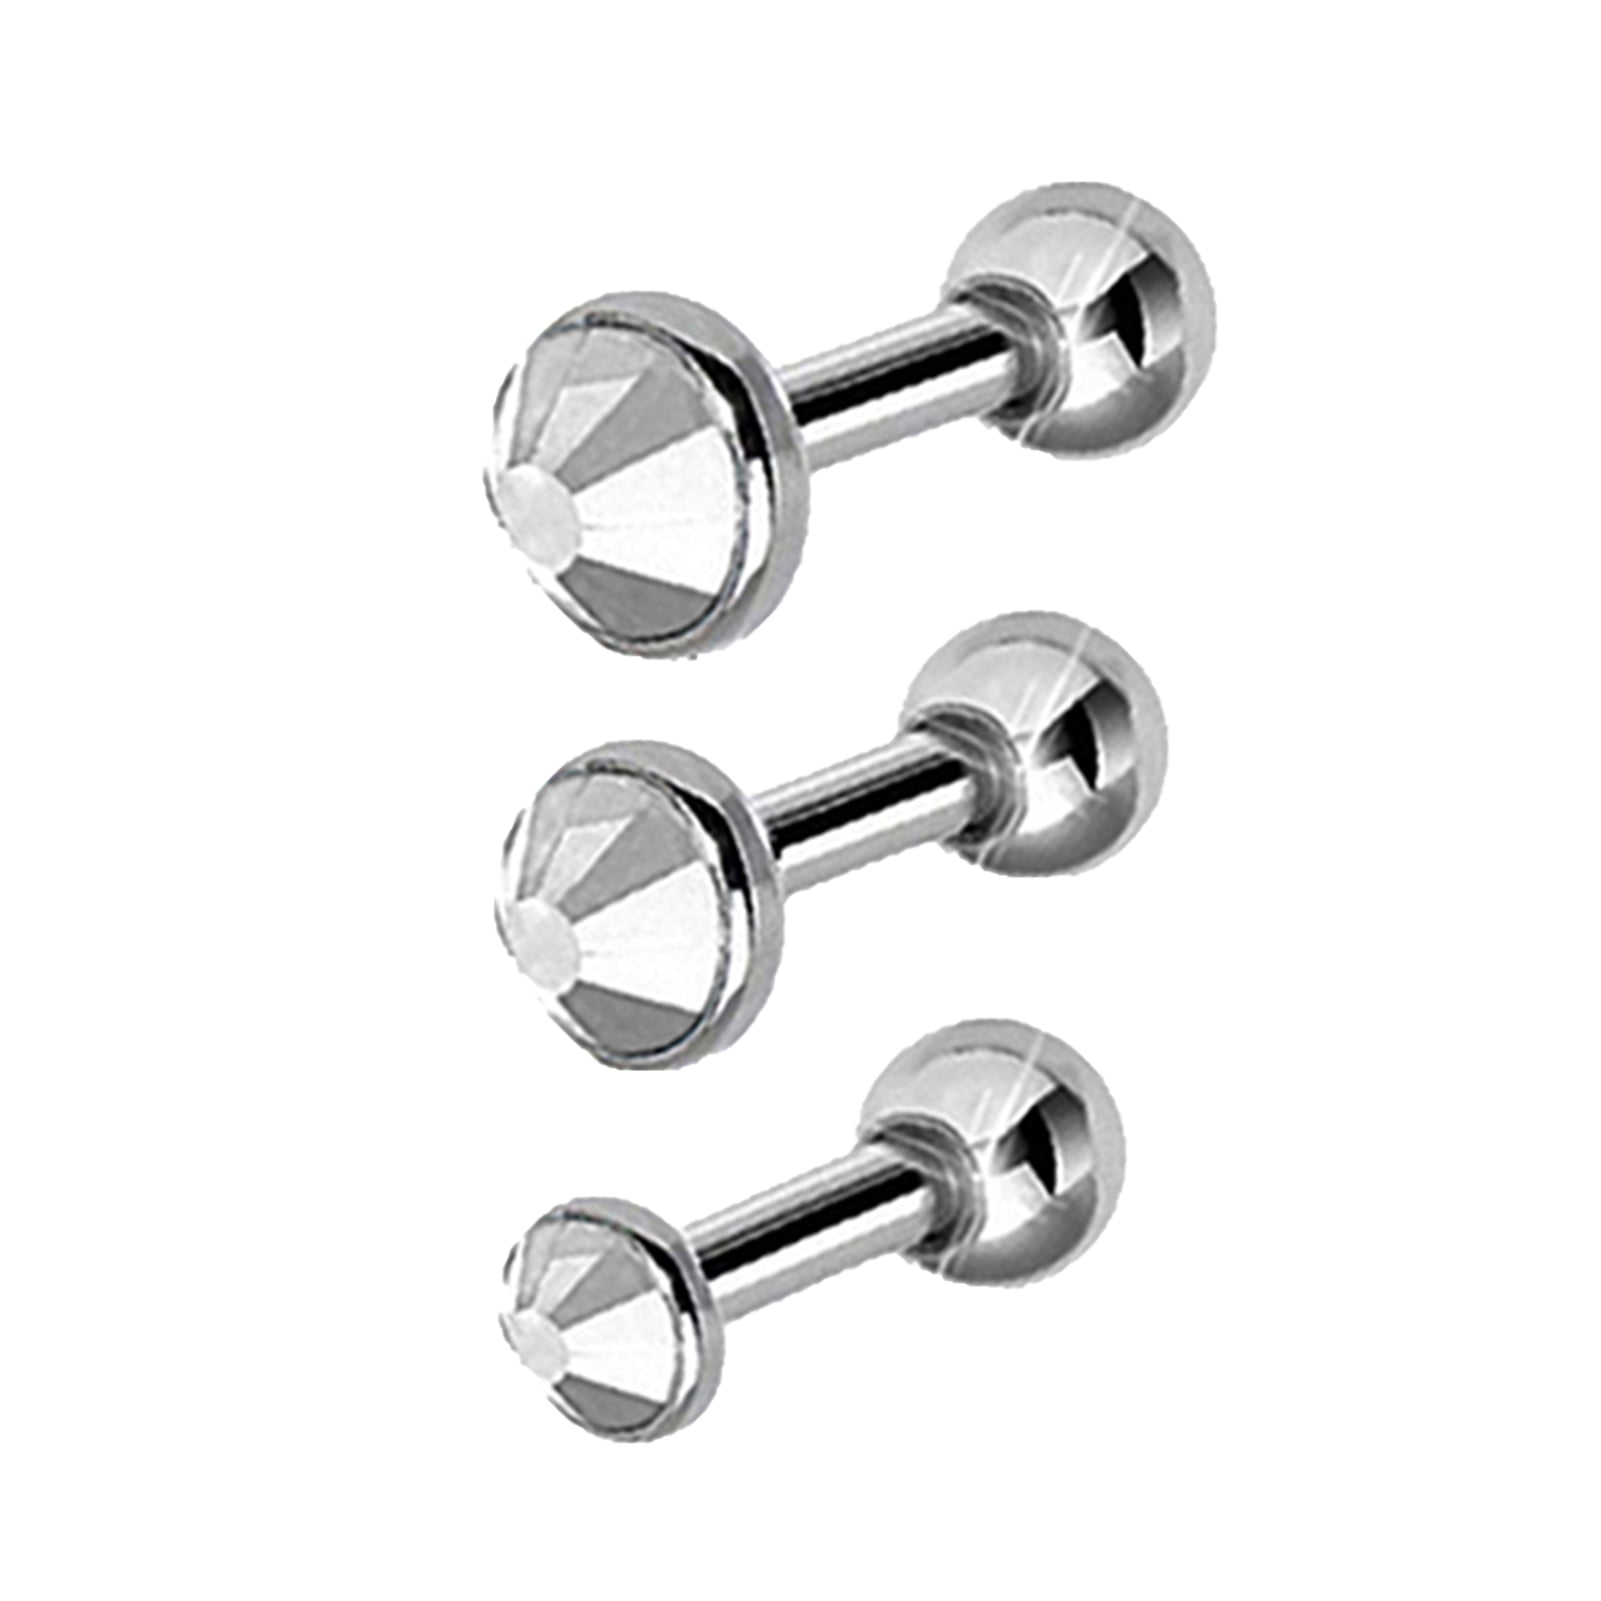 Ayyufe Pack Of 3/Set Women Stainless Steel Round Rhinestone Ear Studs Earrings for Party